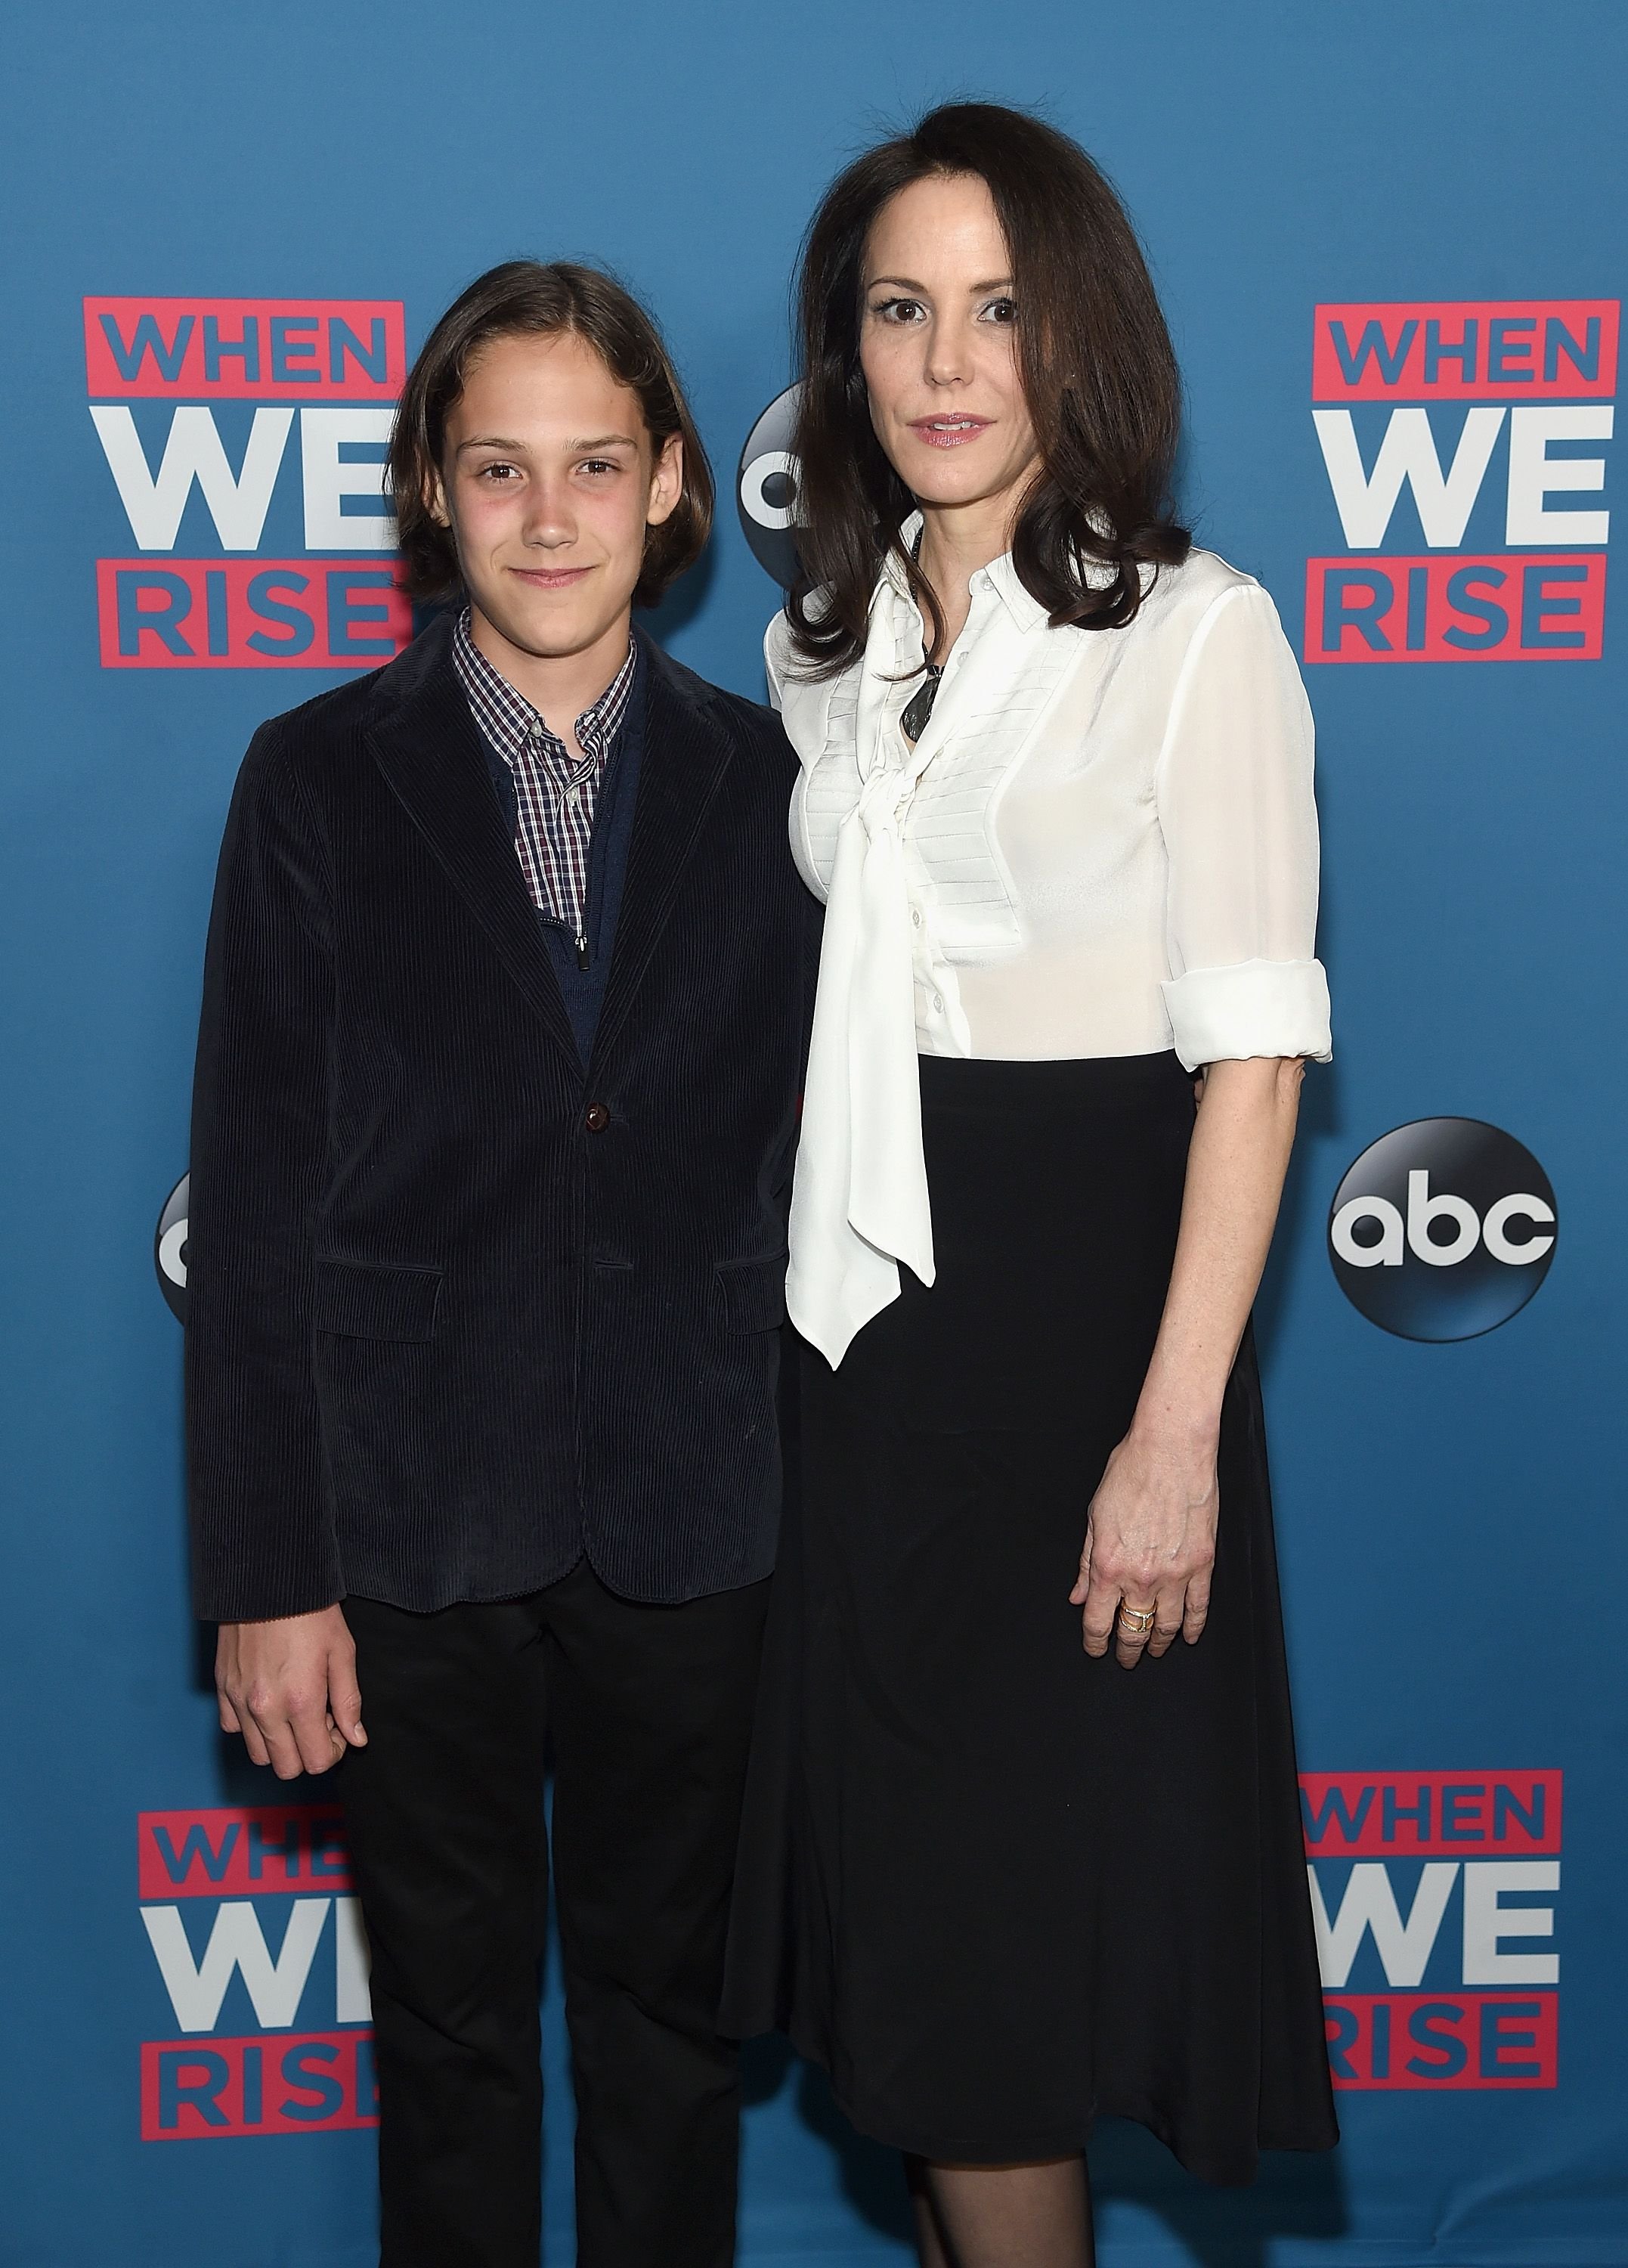 Mary-Louise Parker and her son William Parker at the screening of "When We Rise" in New York in 2017 | Source: Getty Images